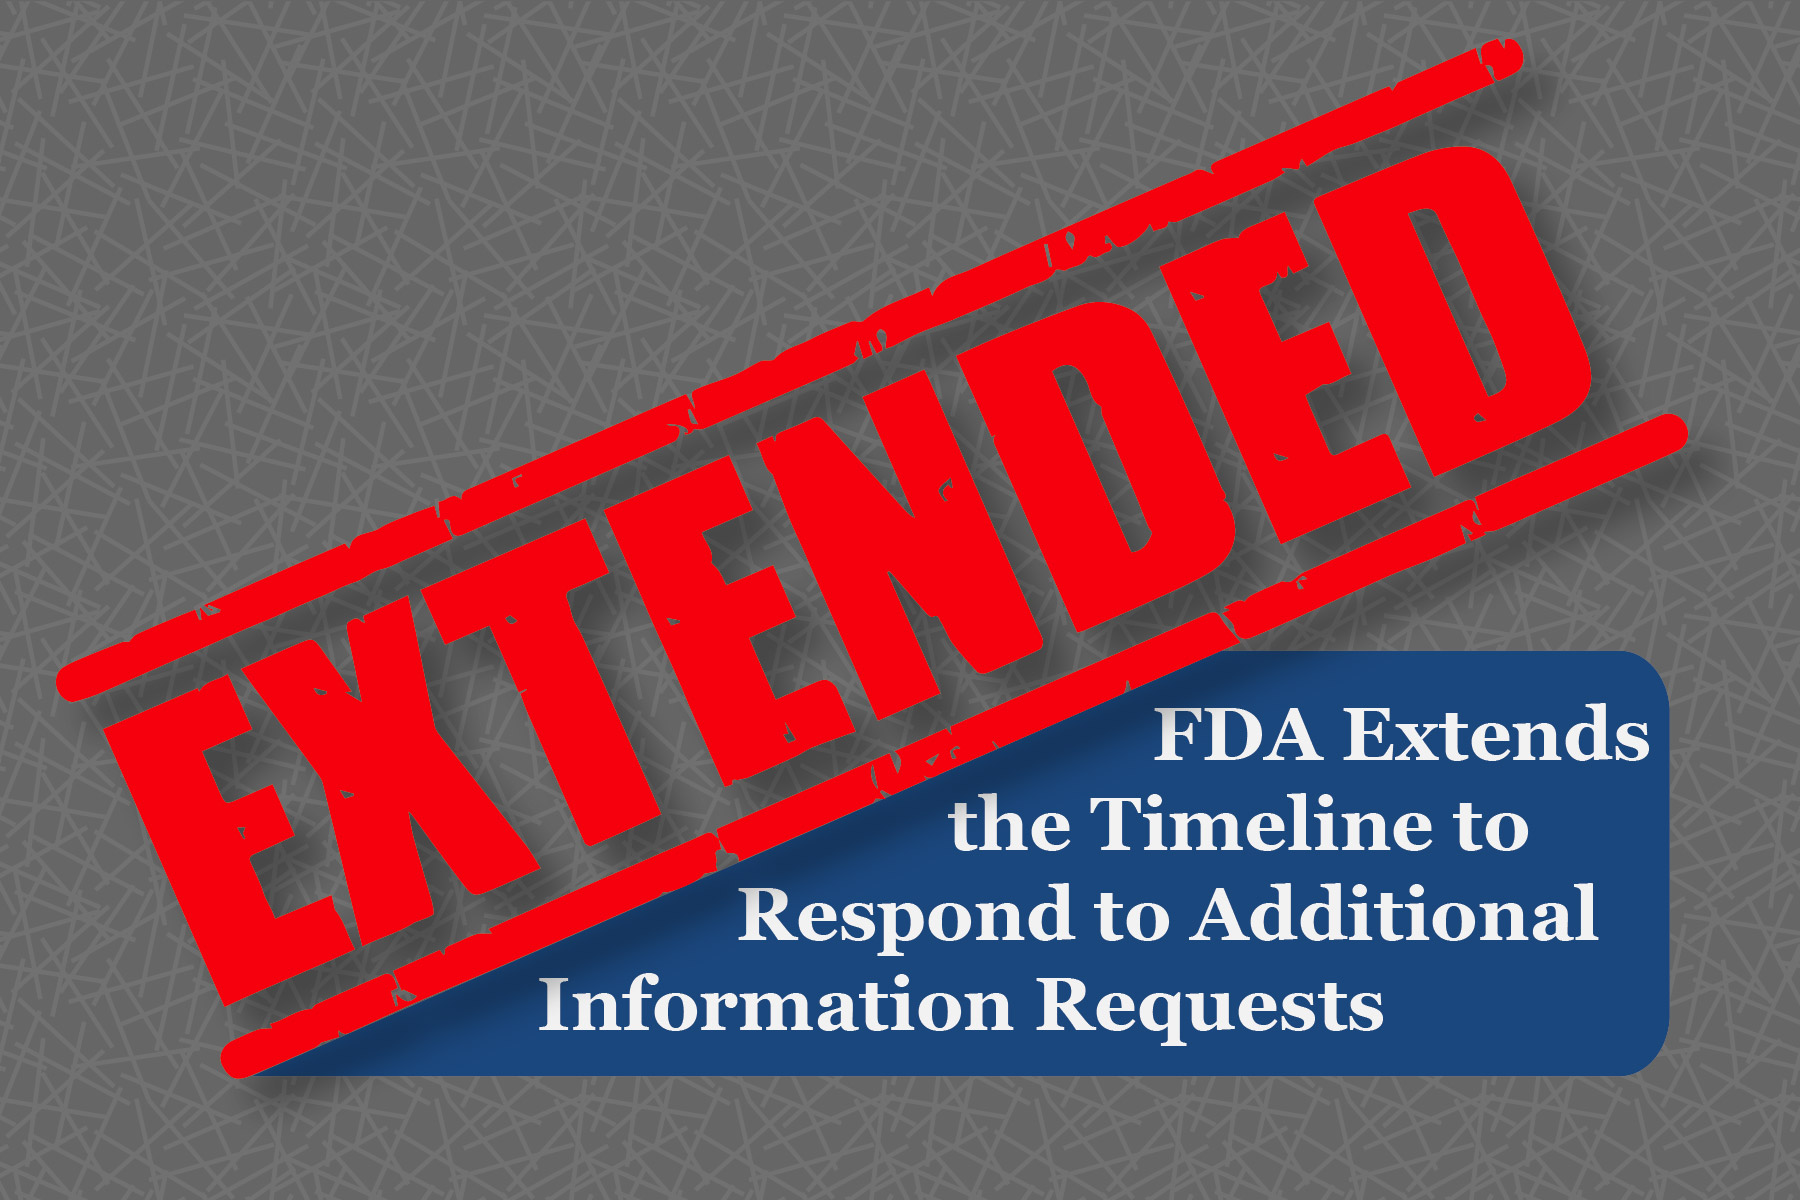 FDA Extends the Timeline to Respond to Additional Information Requests